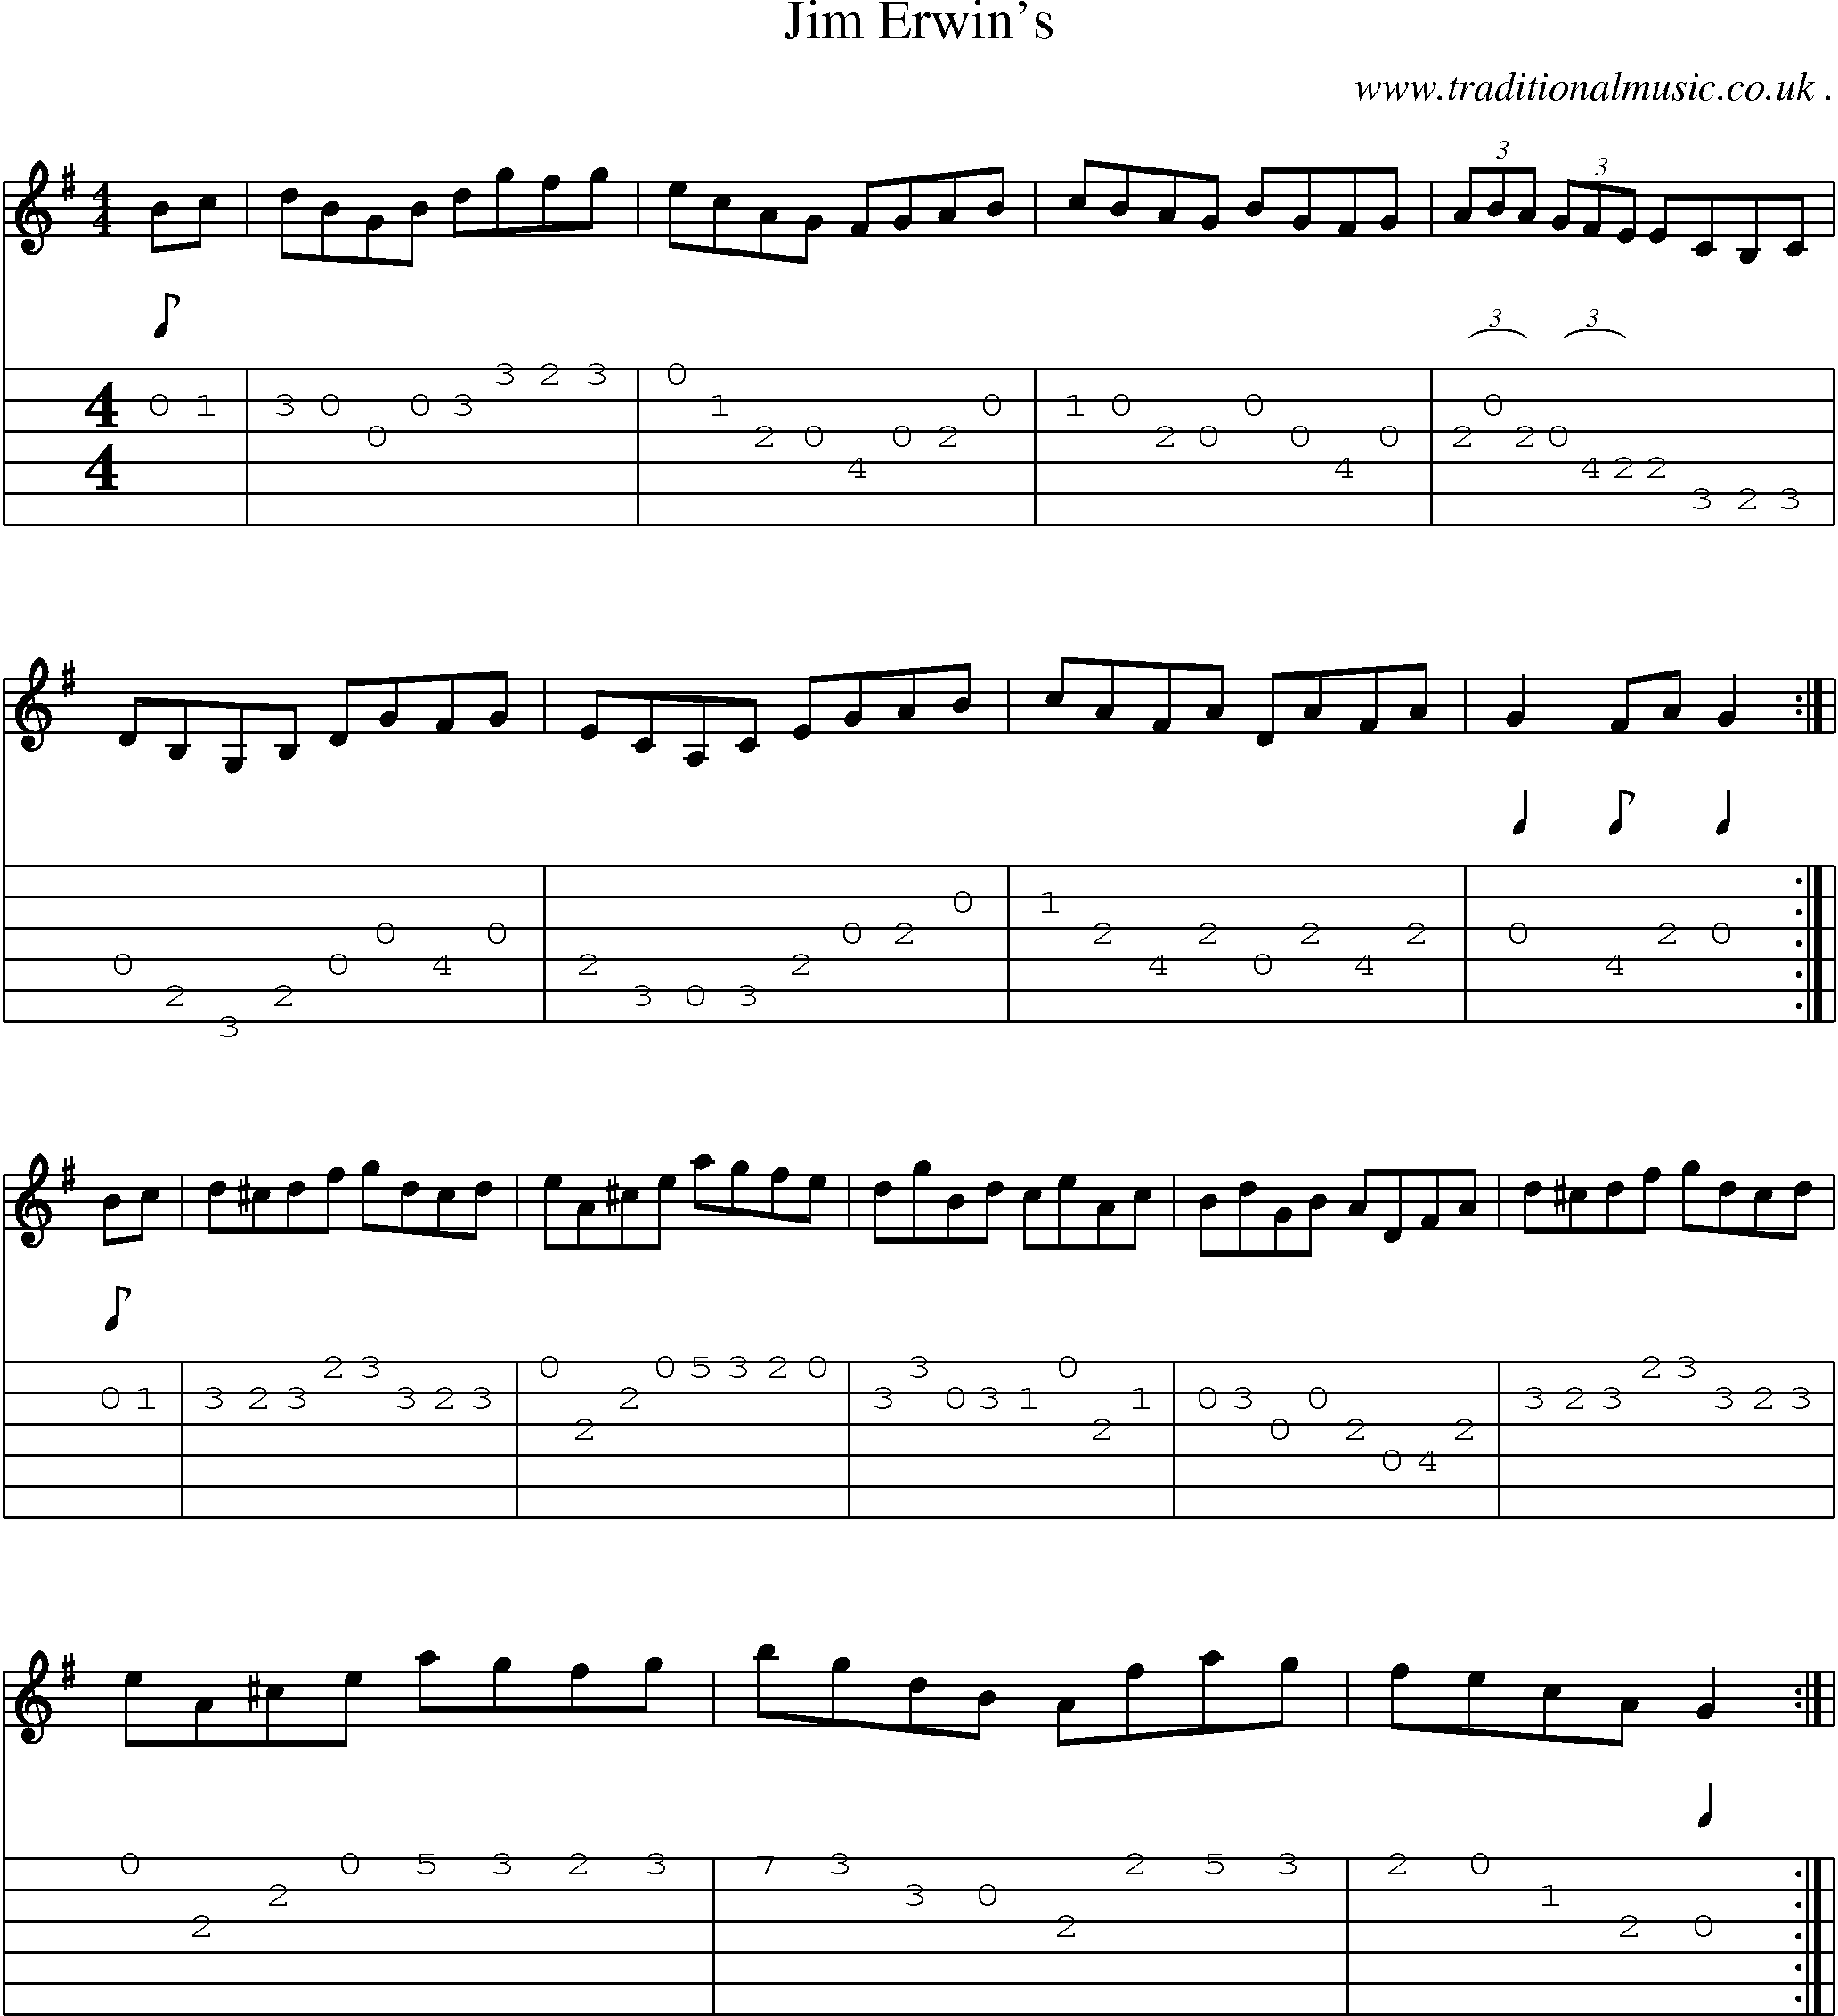 Sheet-Music and Guitar Tabs for Jim Erwins